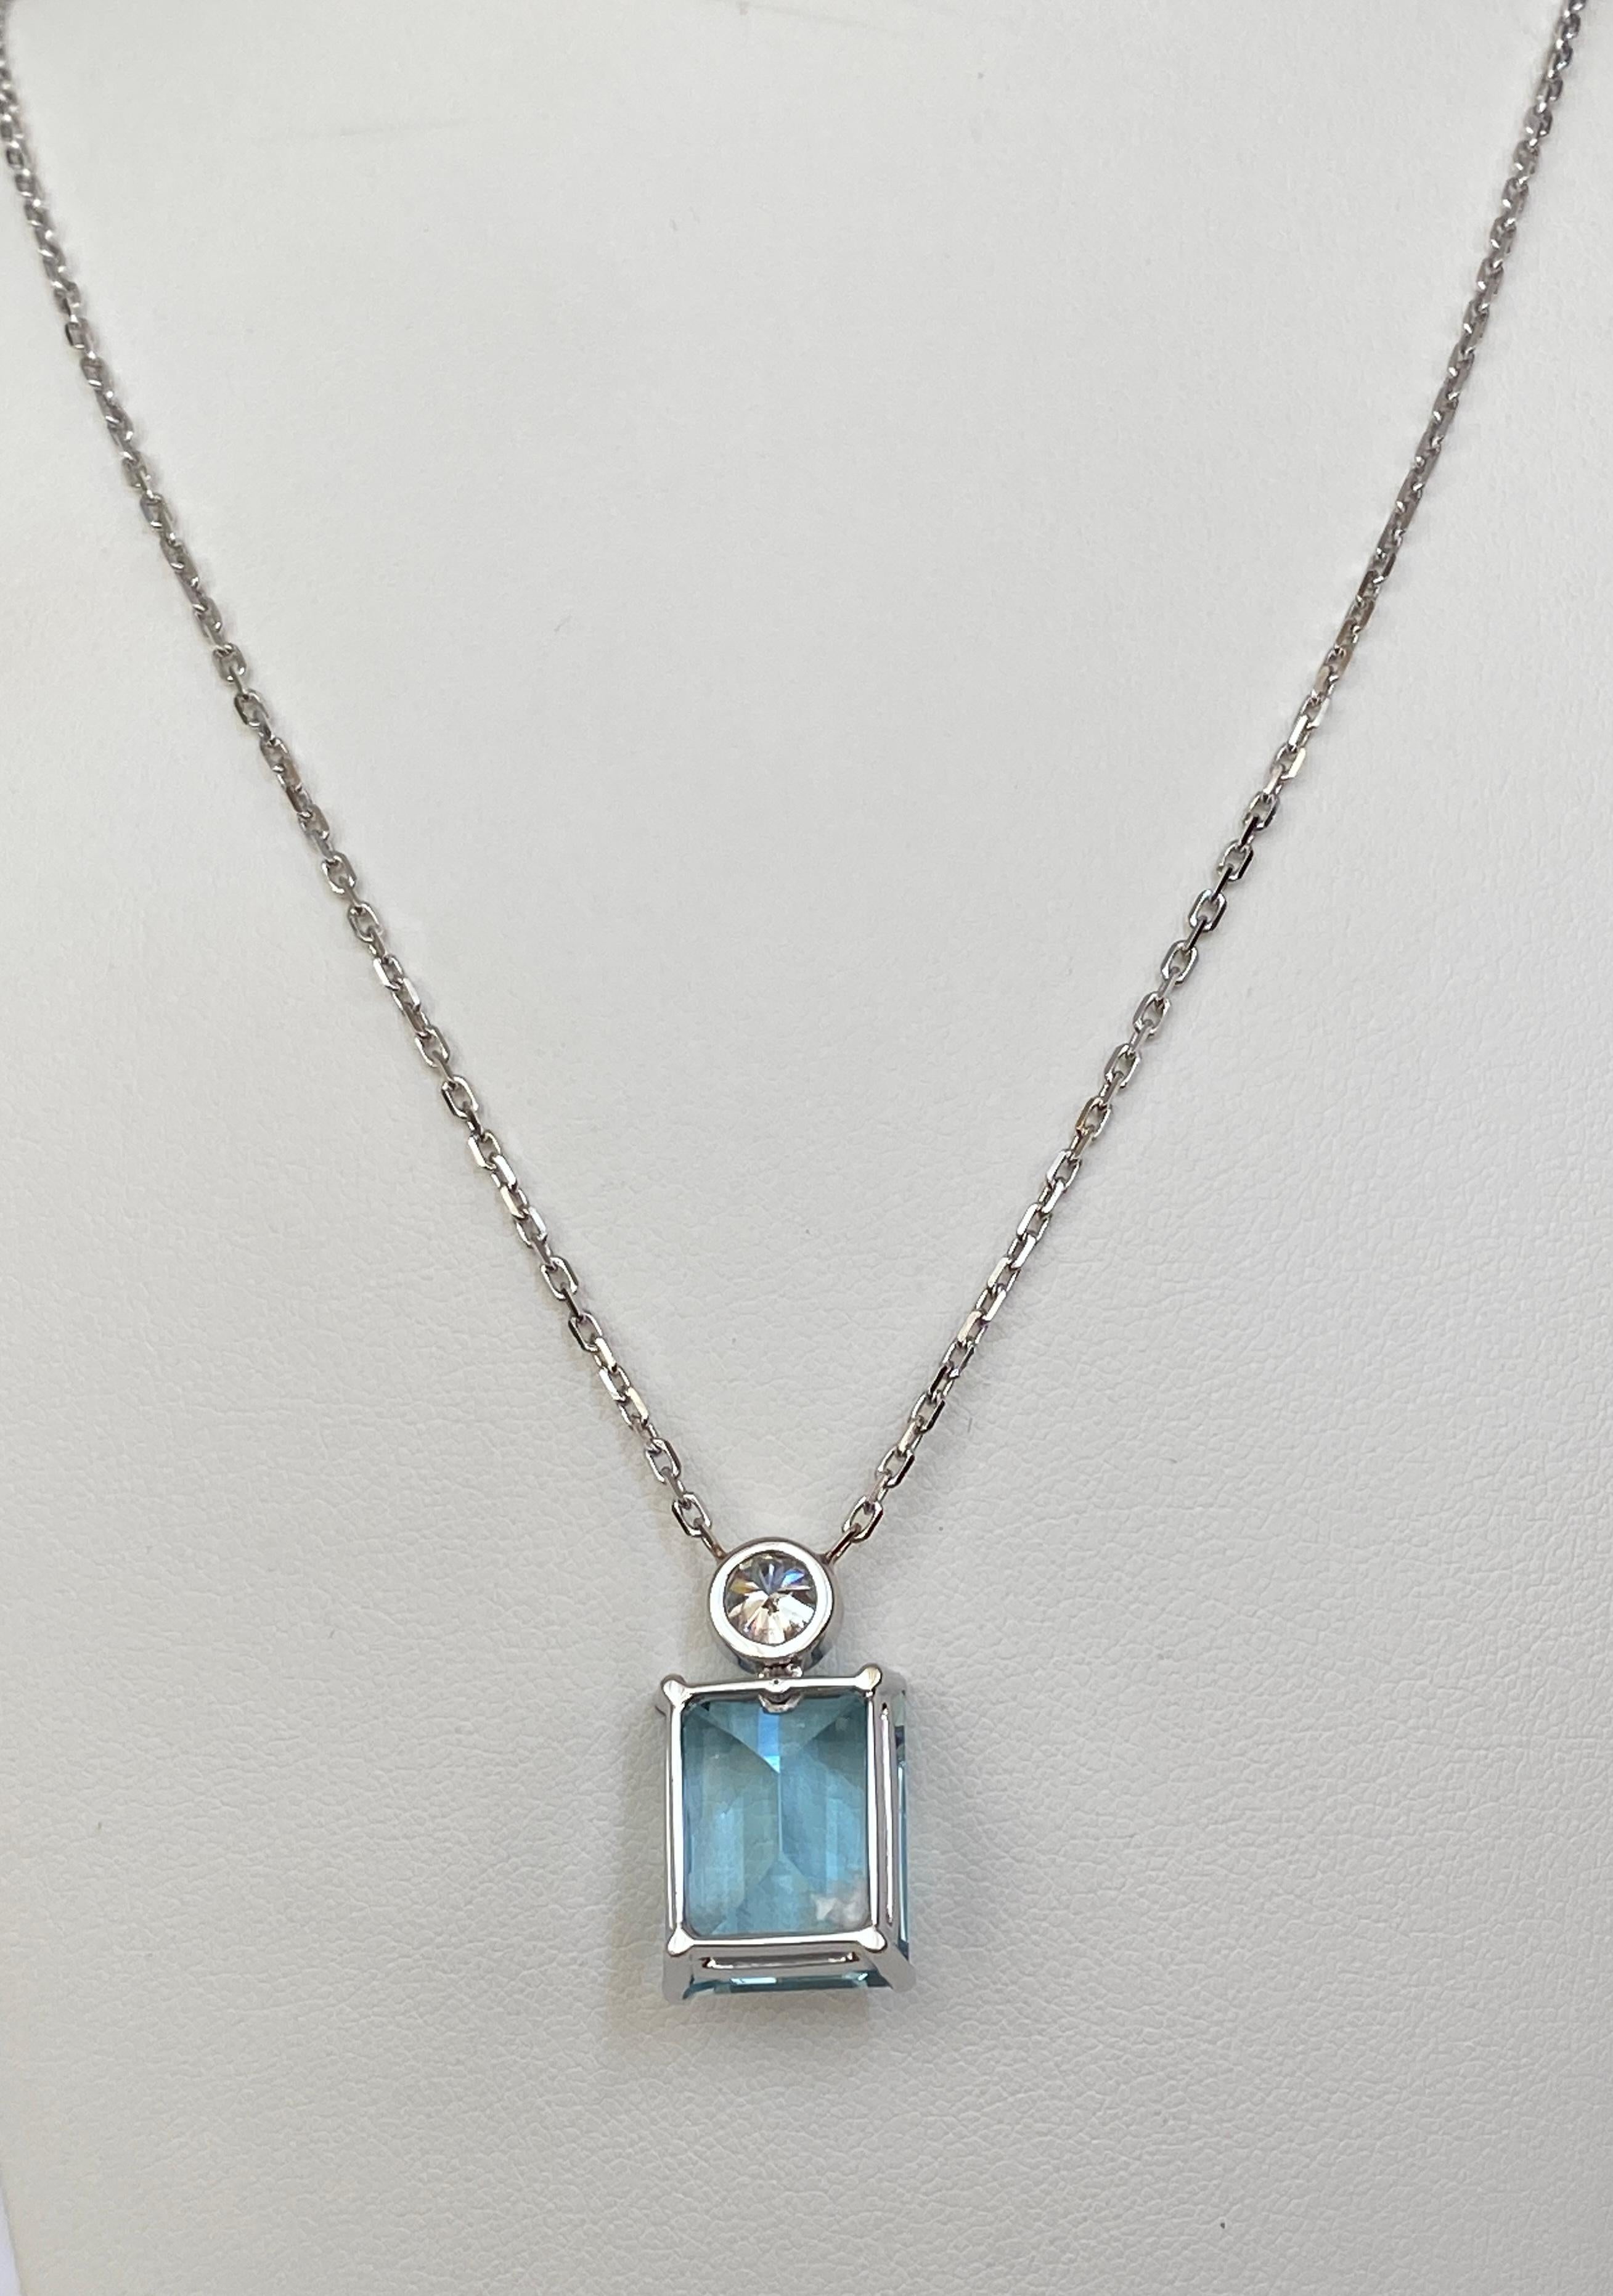 18 Karat White Gold Necklace with a Diamond Pendant Decorated with Aquamarine  For Sale 1